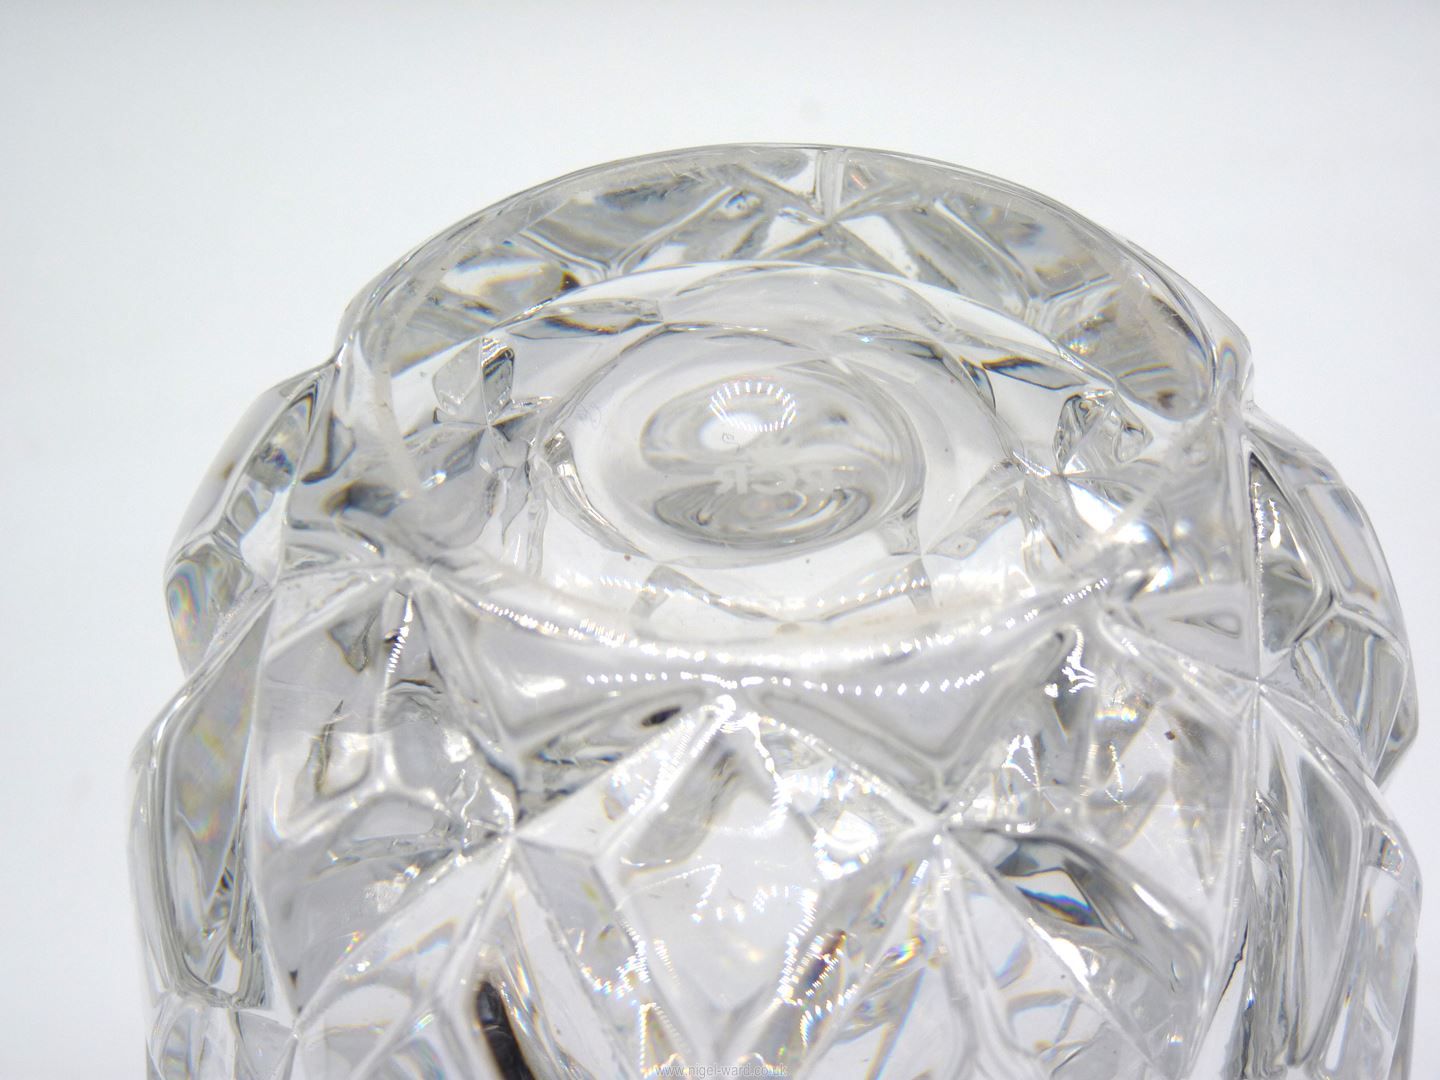 A large heavy RCR glass crystal vase, 11'' high. - Image 2 of 2